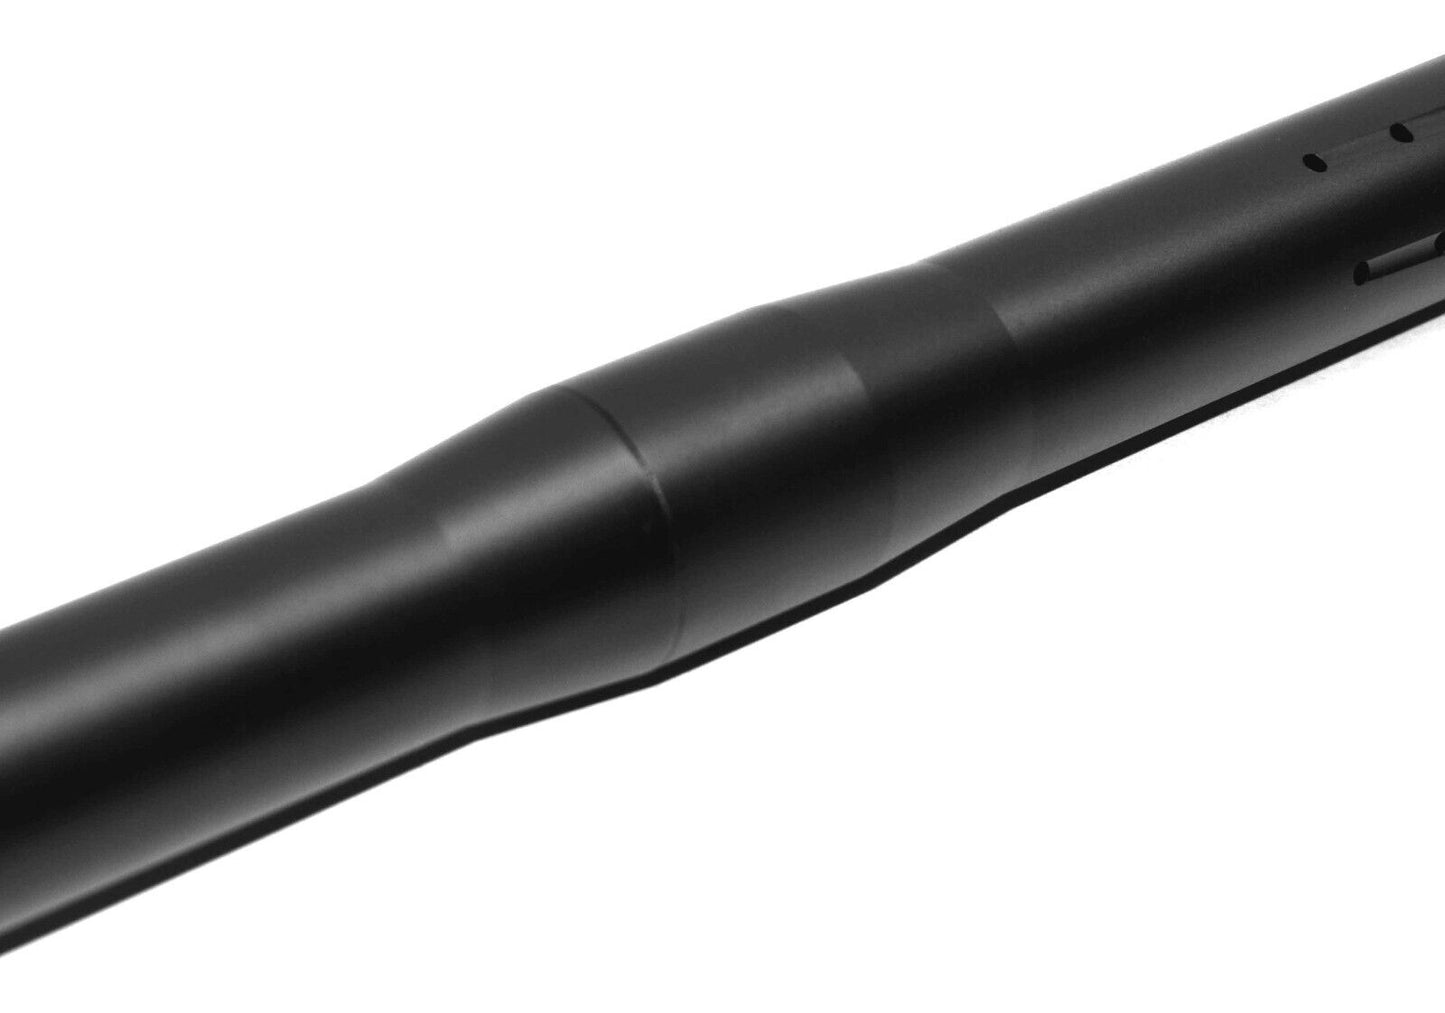 Trinity tactical barrel 16 inches long compatible with Tippmann 98 paintball marker.